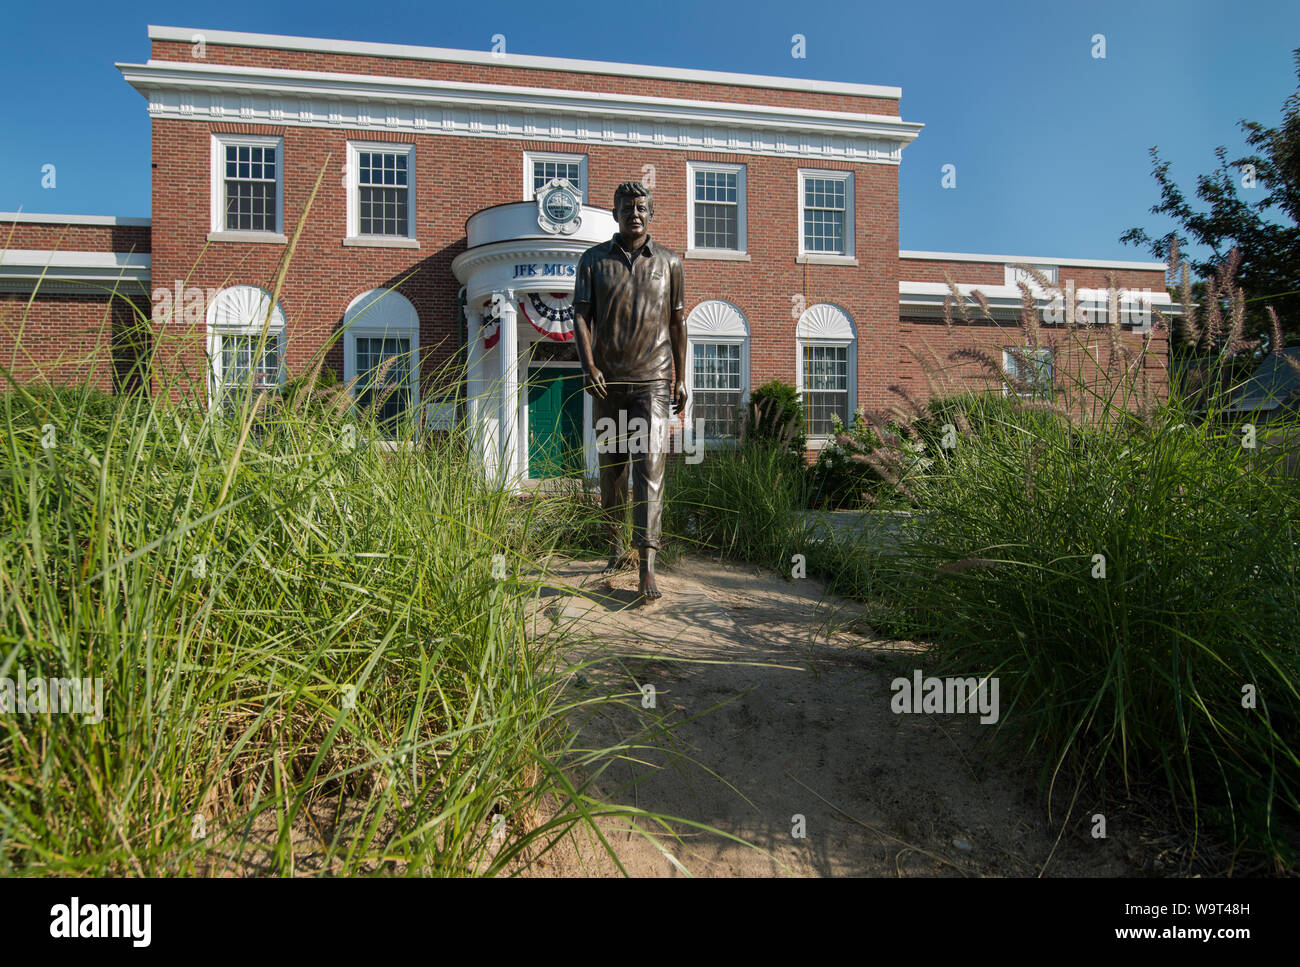 Life-sized bronze statue of John F. Kennedy (JFK) by sculptor David Lewis in front of the JFK Museum in Hyannis, Massachusetts. Stock Photo